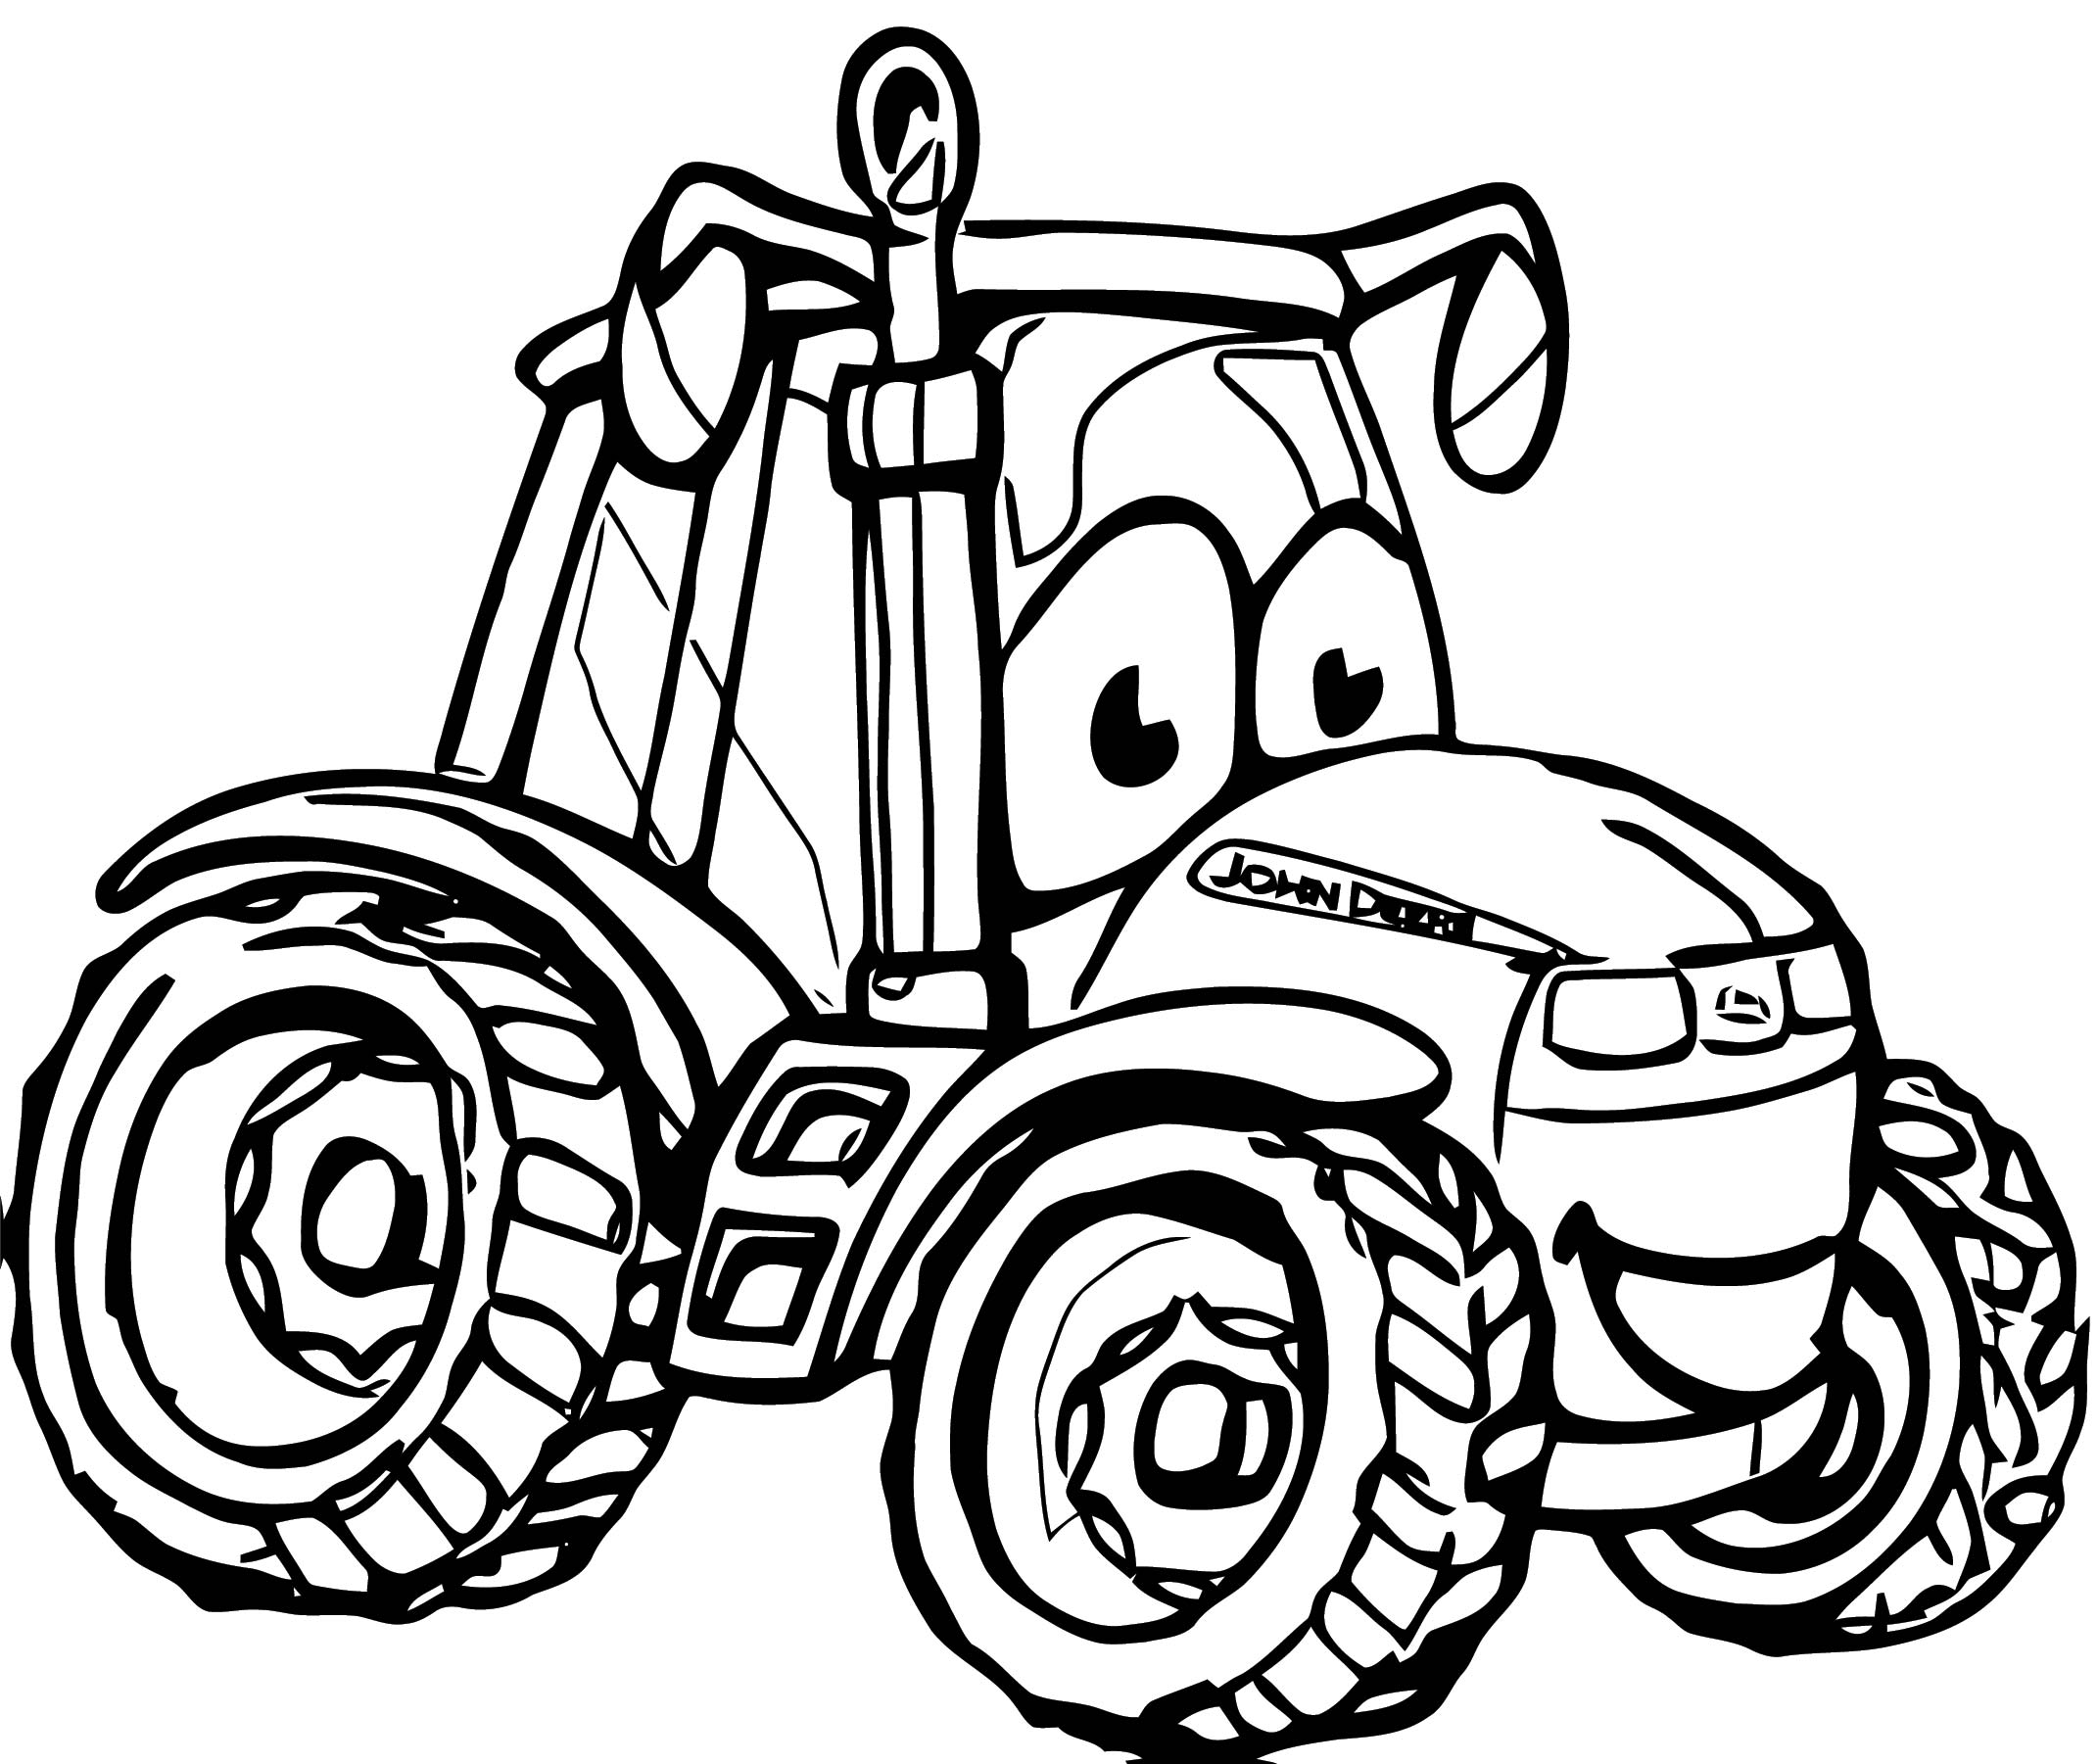 Tractor Coloring Pages John Johnny Deere Tractor Coloring Page Sexiz Pix